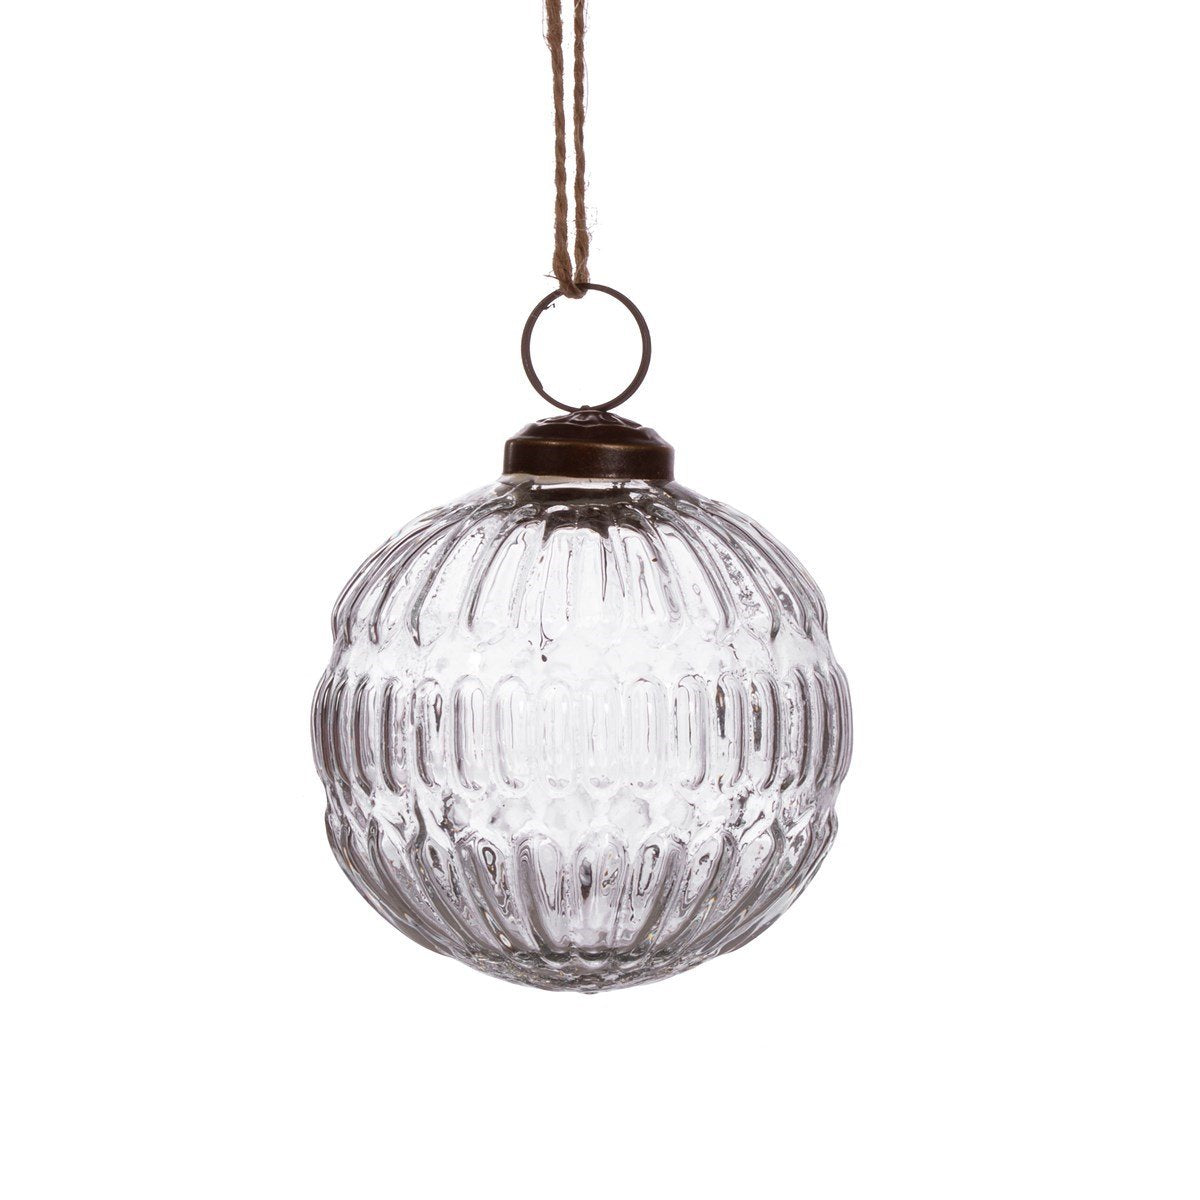 View Clear Recycled Glass Grooved Bauble information